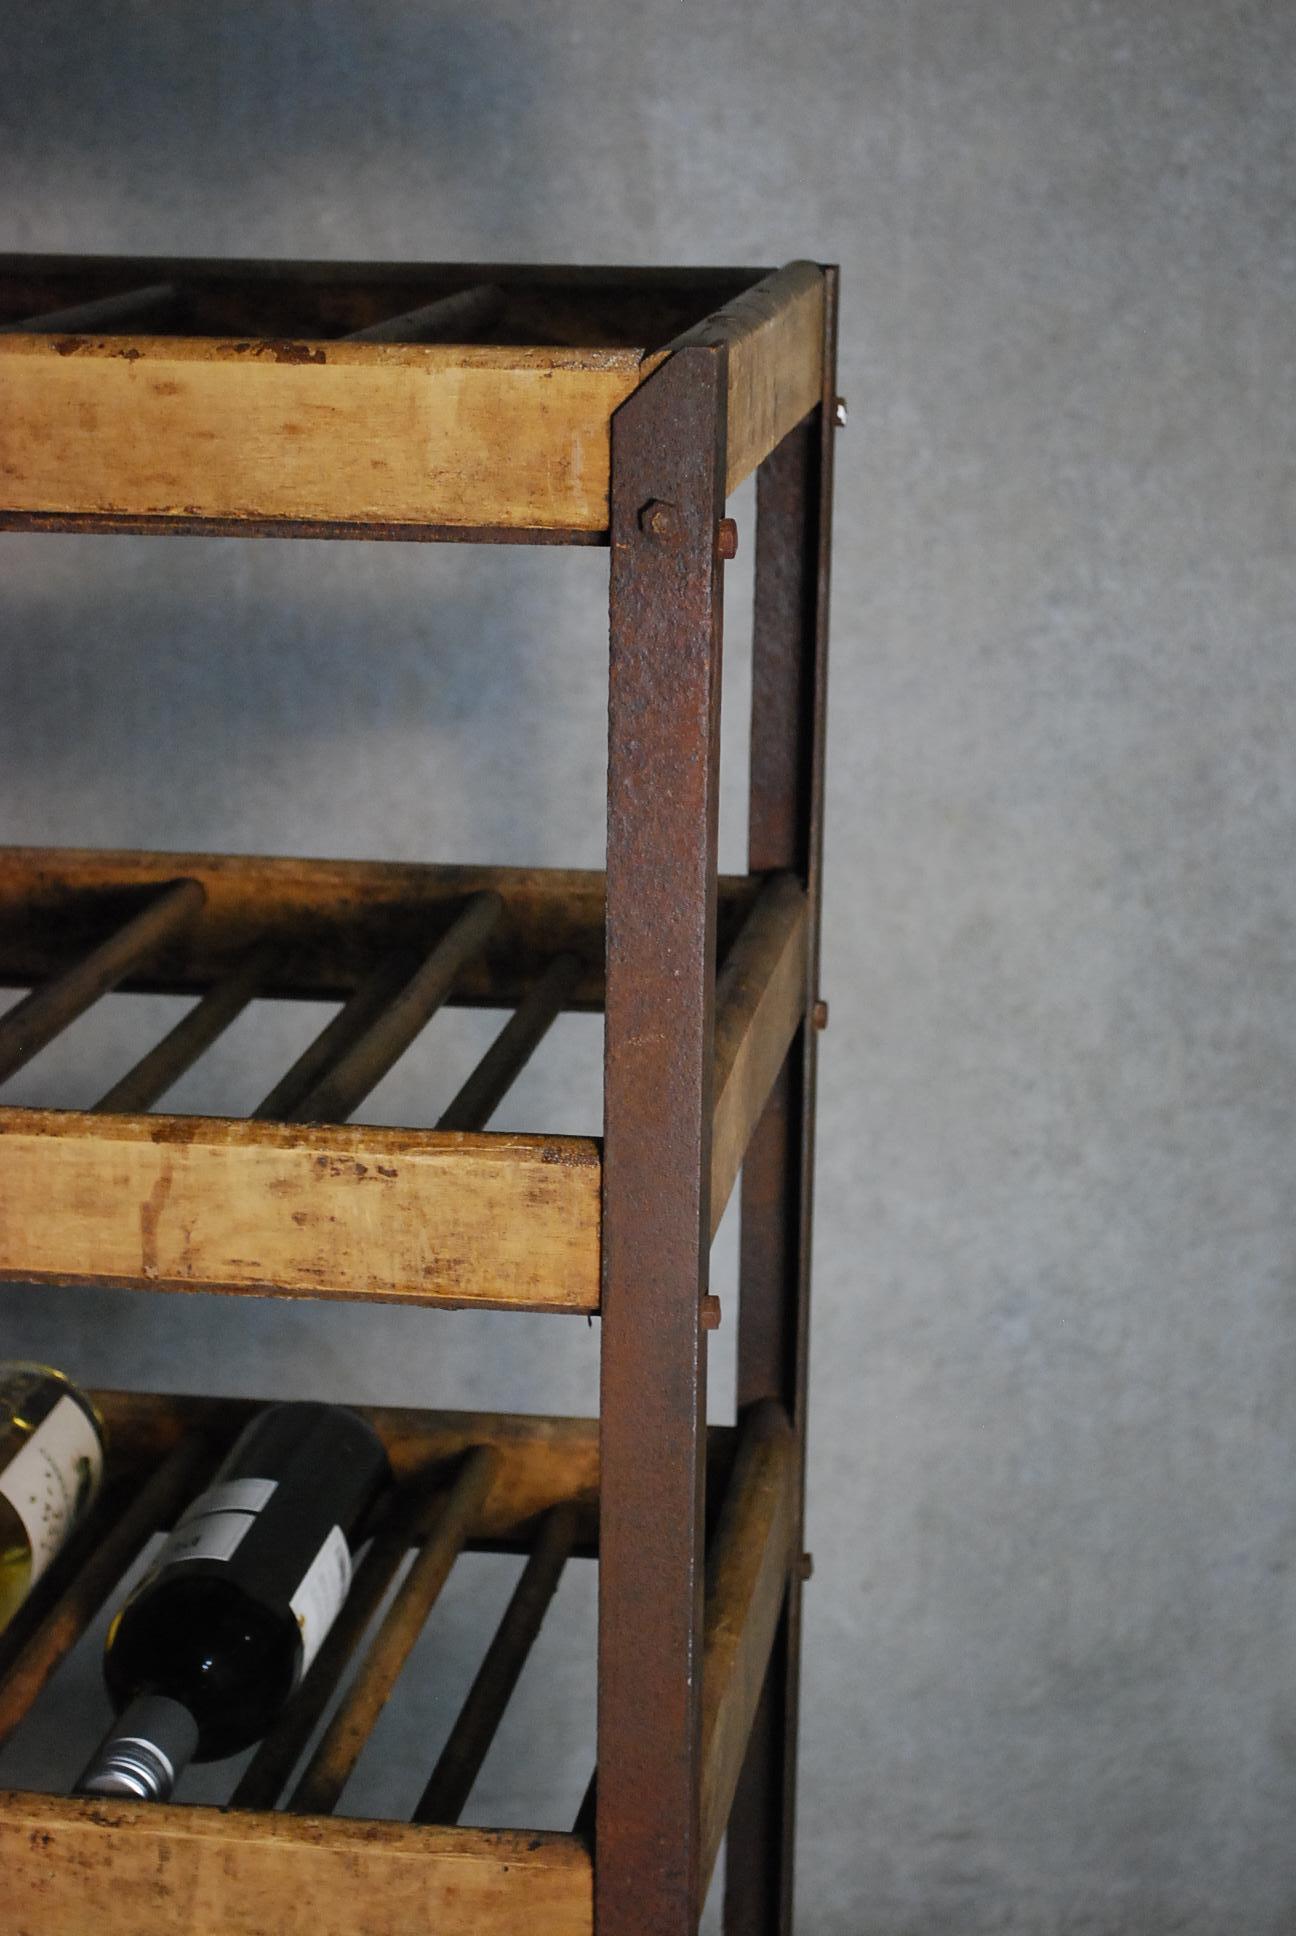 Nice working shoe rack salvaged from an early shoe factory here in Vancouver. This piece has great patina, rolling spoon wheels and tight solid construction.